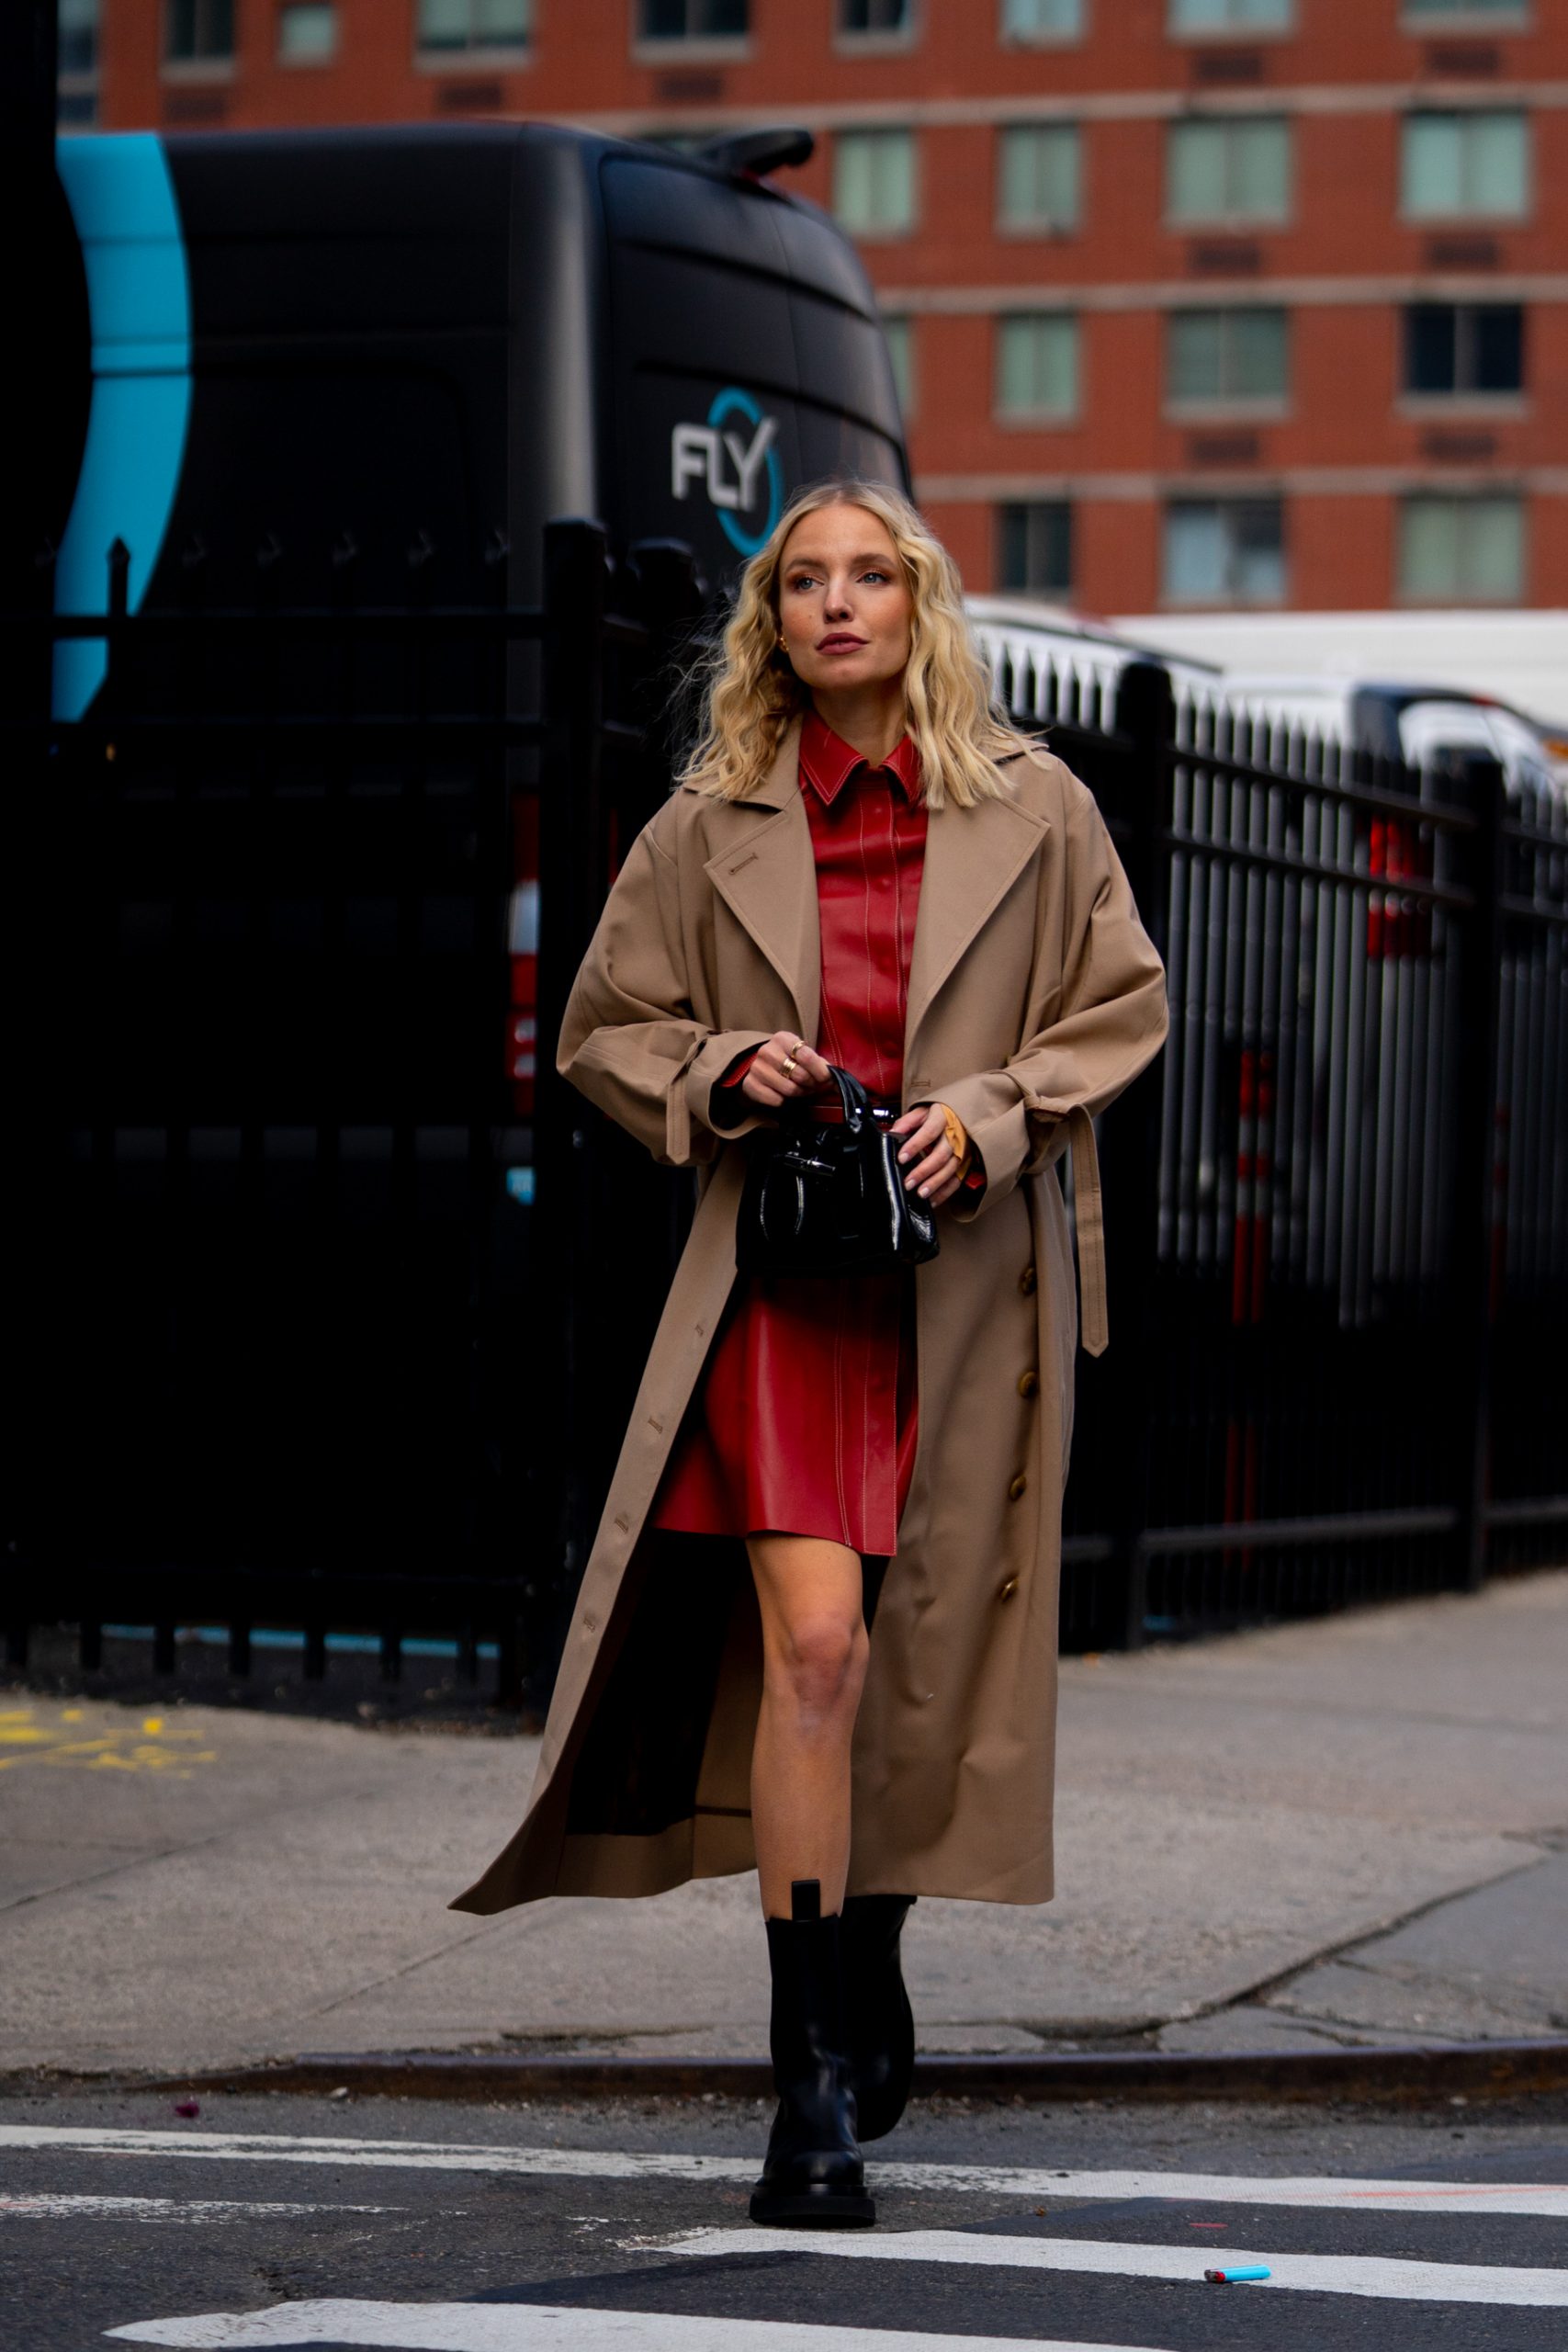 New York Street Style Fall 2020 Influencer Looks | The Impression